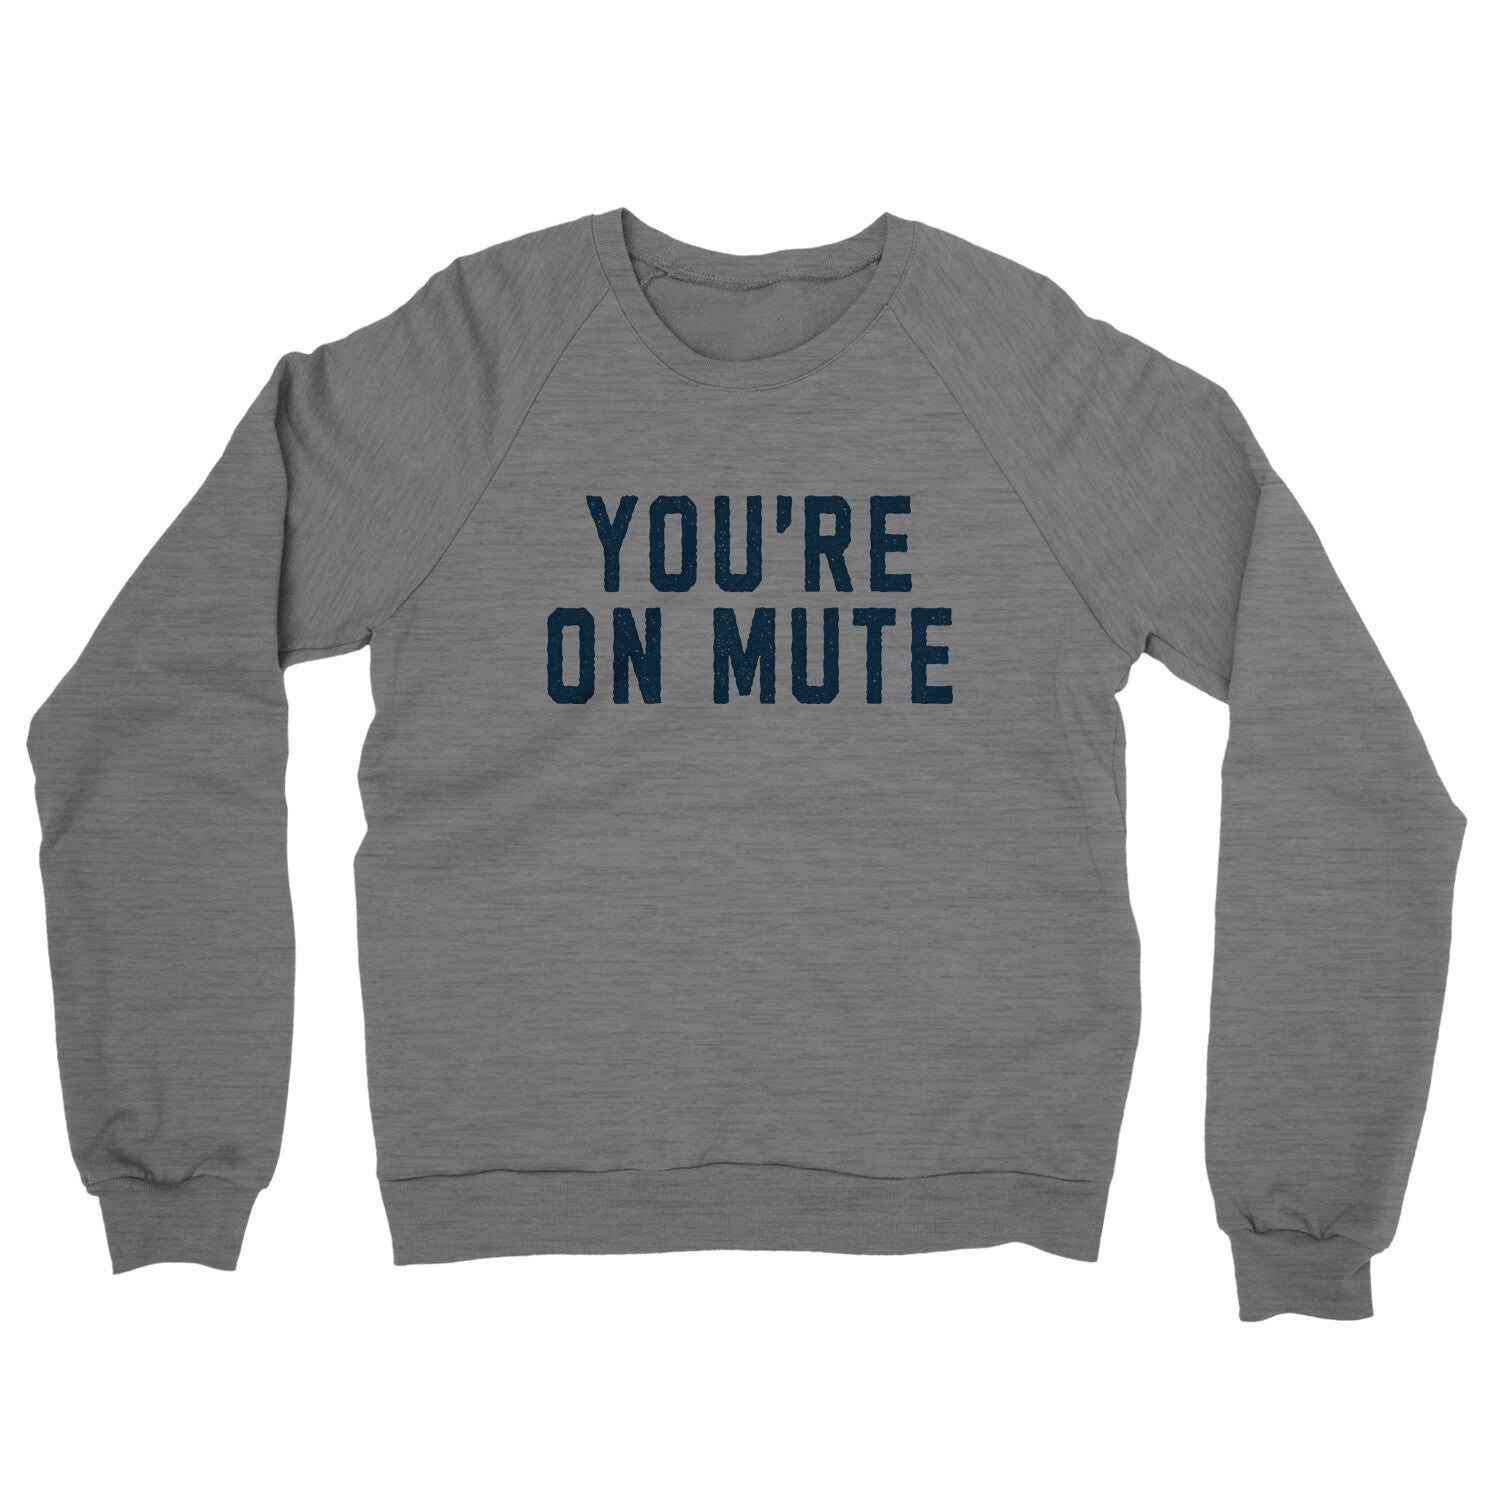 You're on Mute in Graphite Heather Color